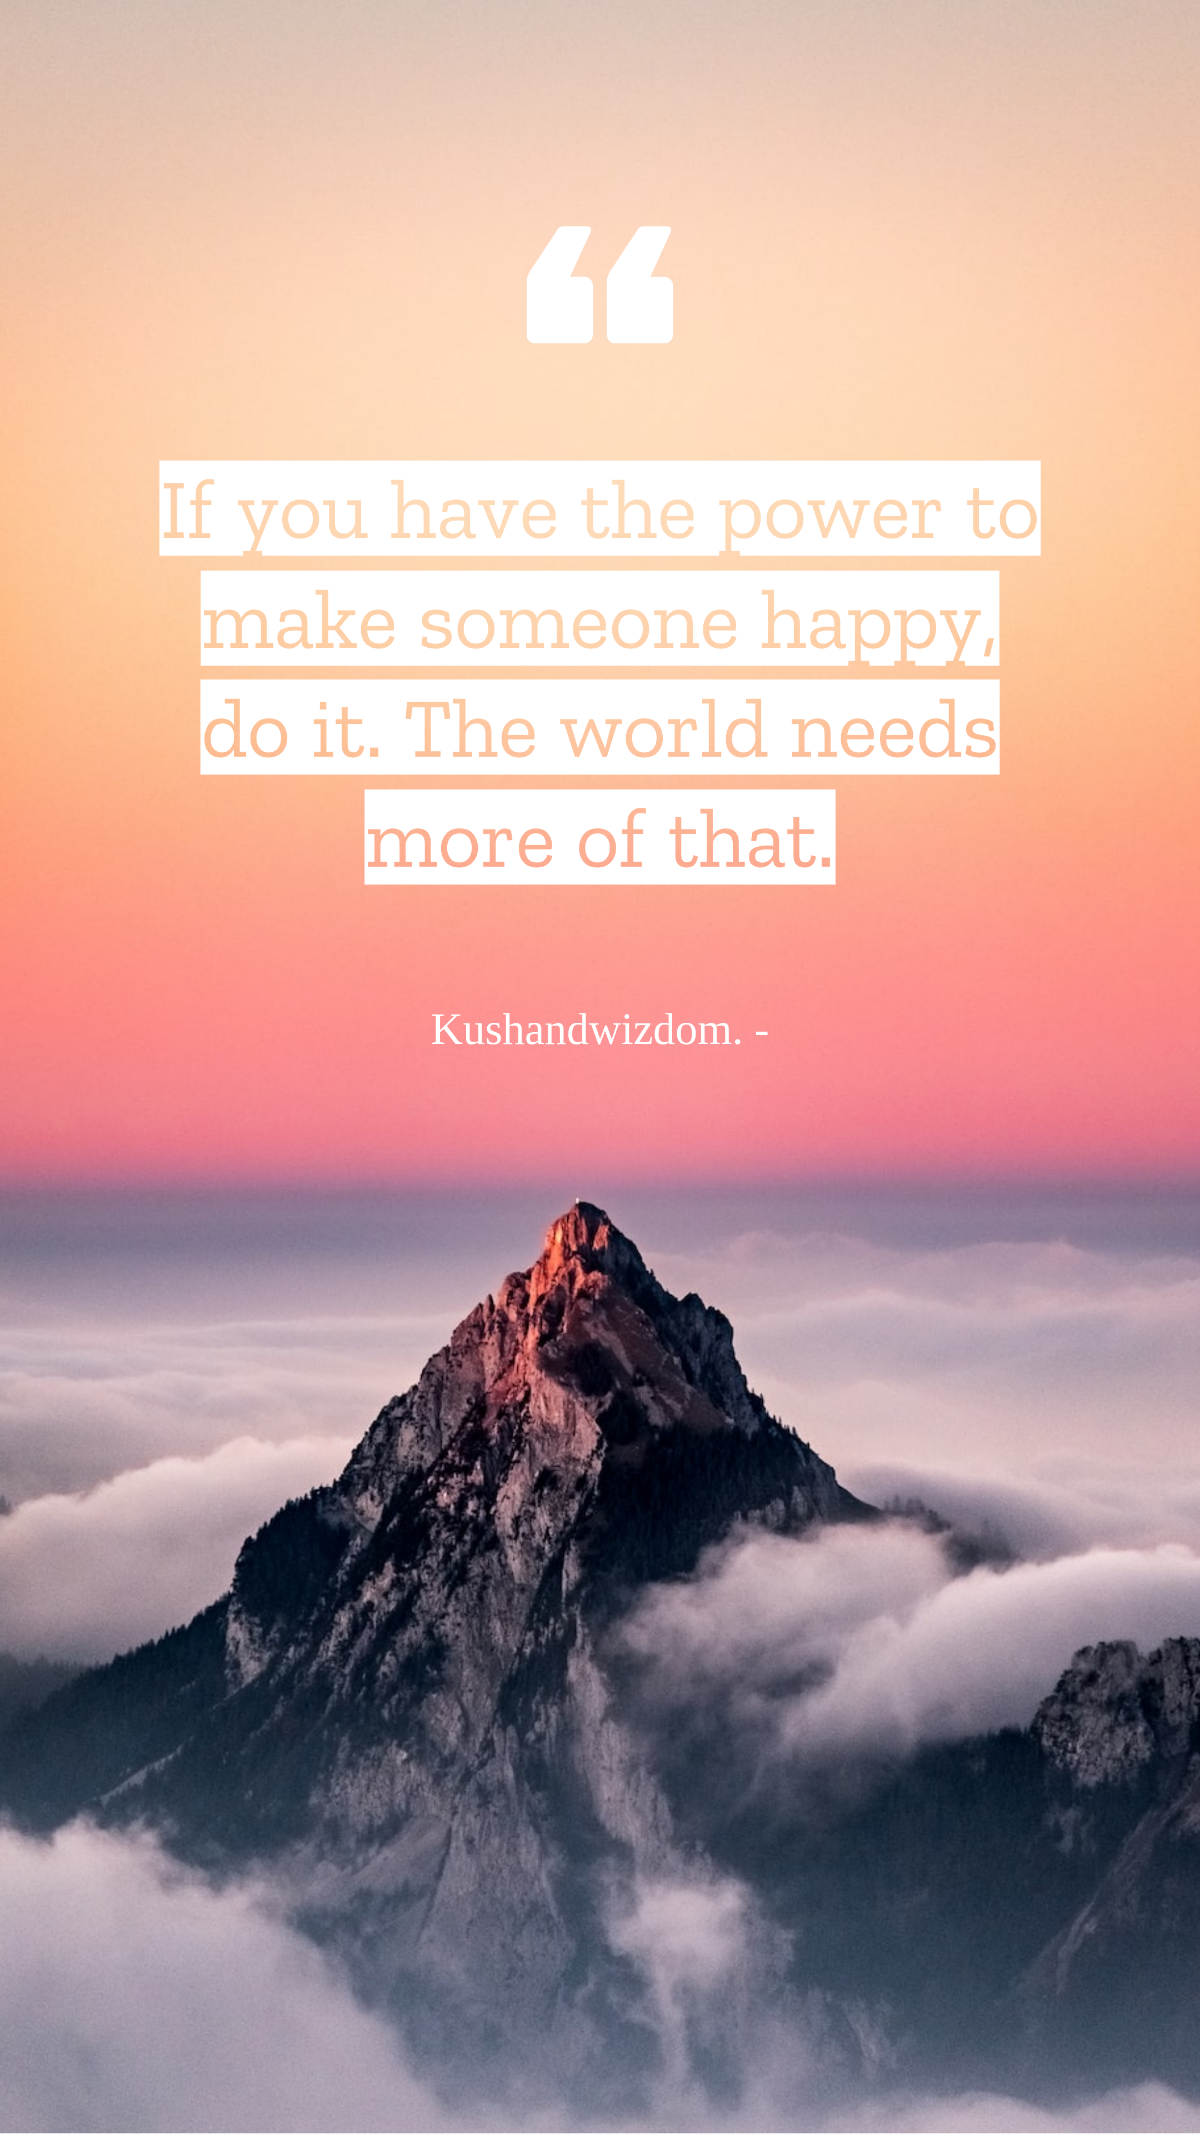 Kushandwizdom. - If you have the power to make someone happy, do it. The world needs more of that. Template